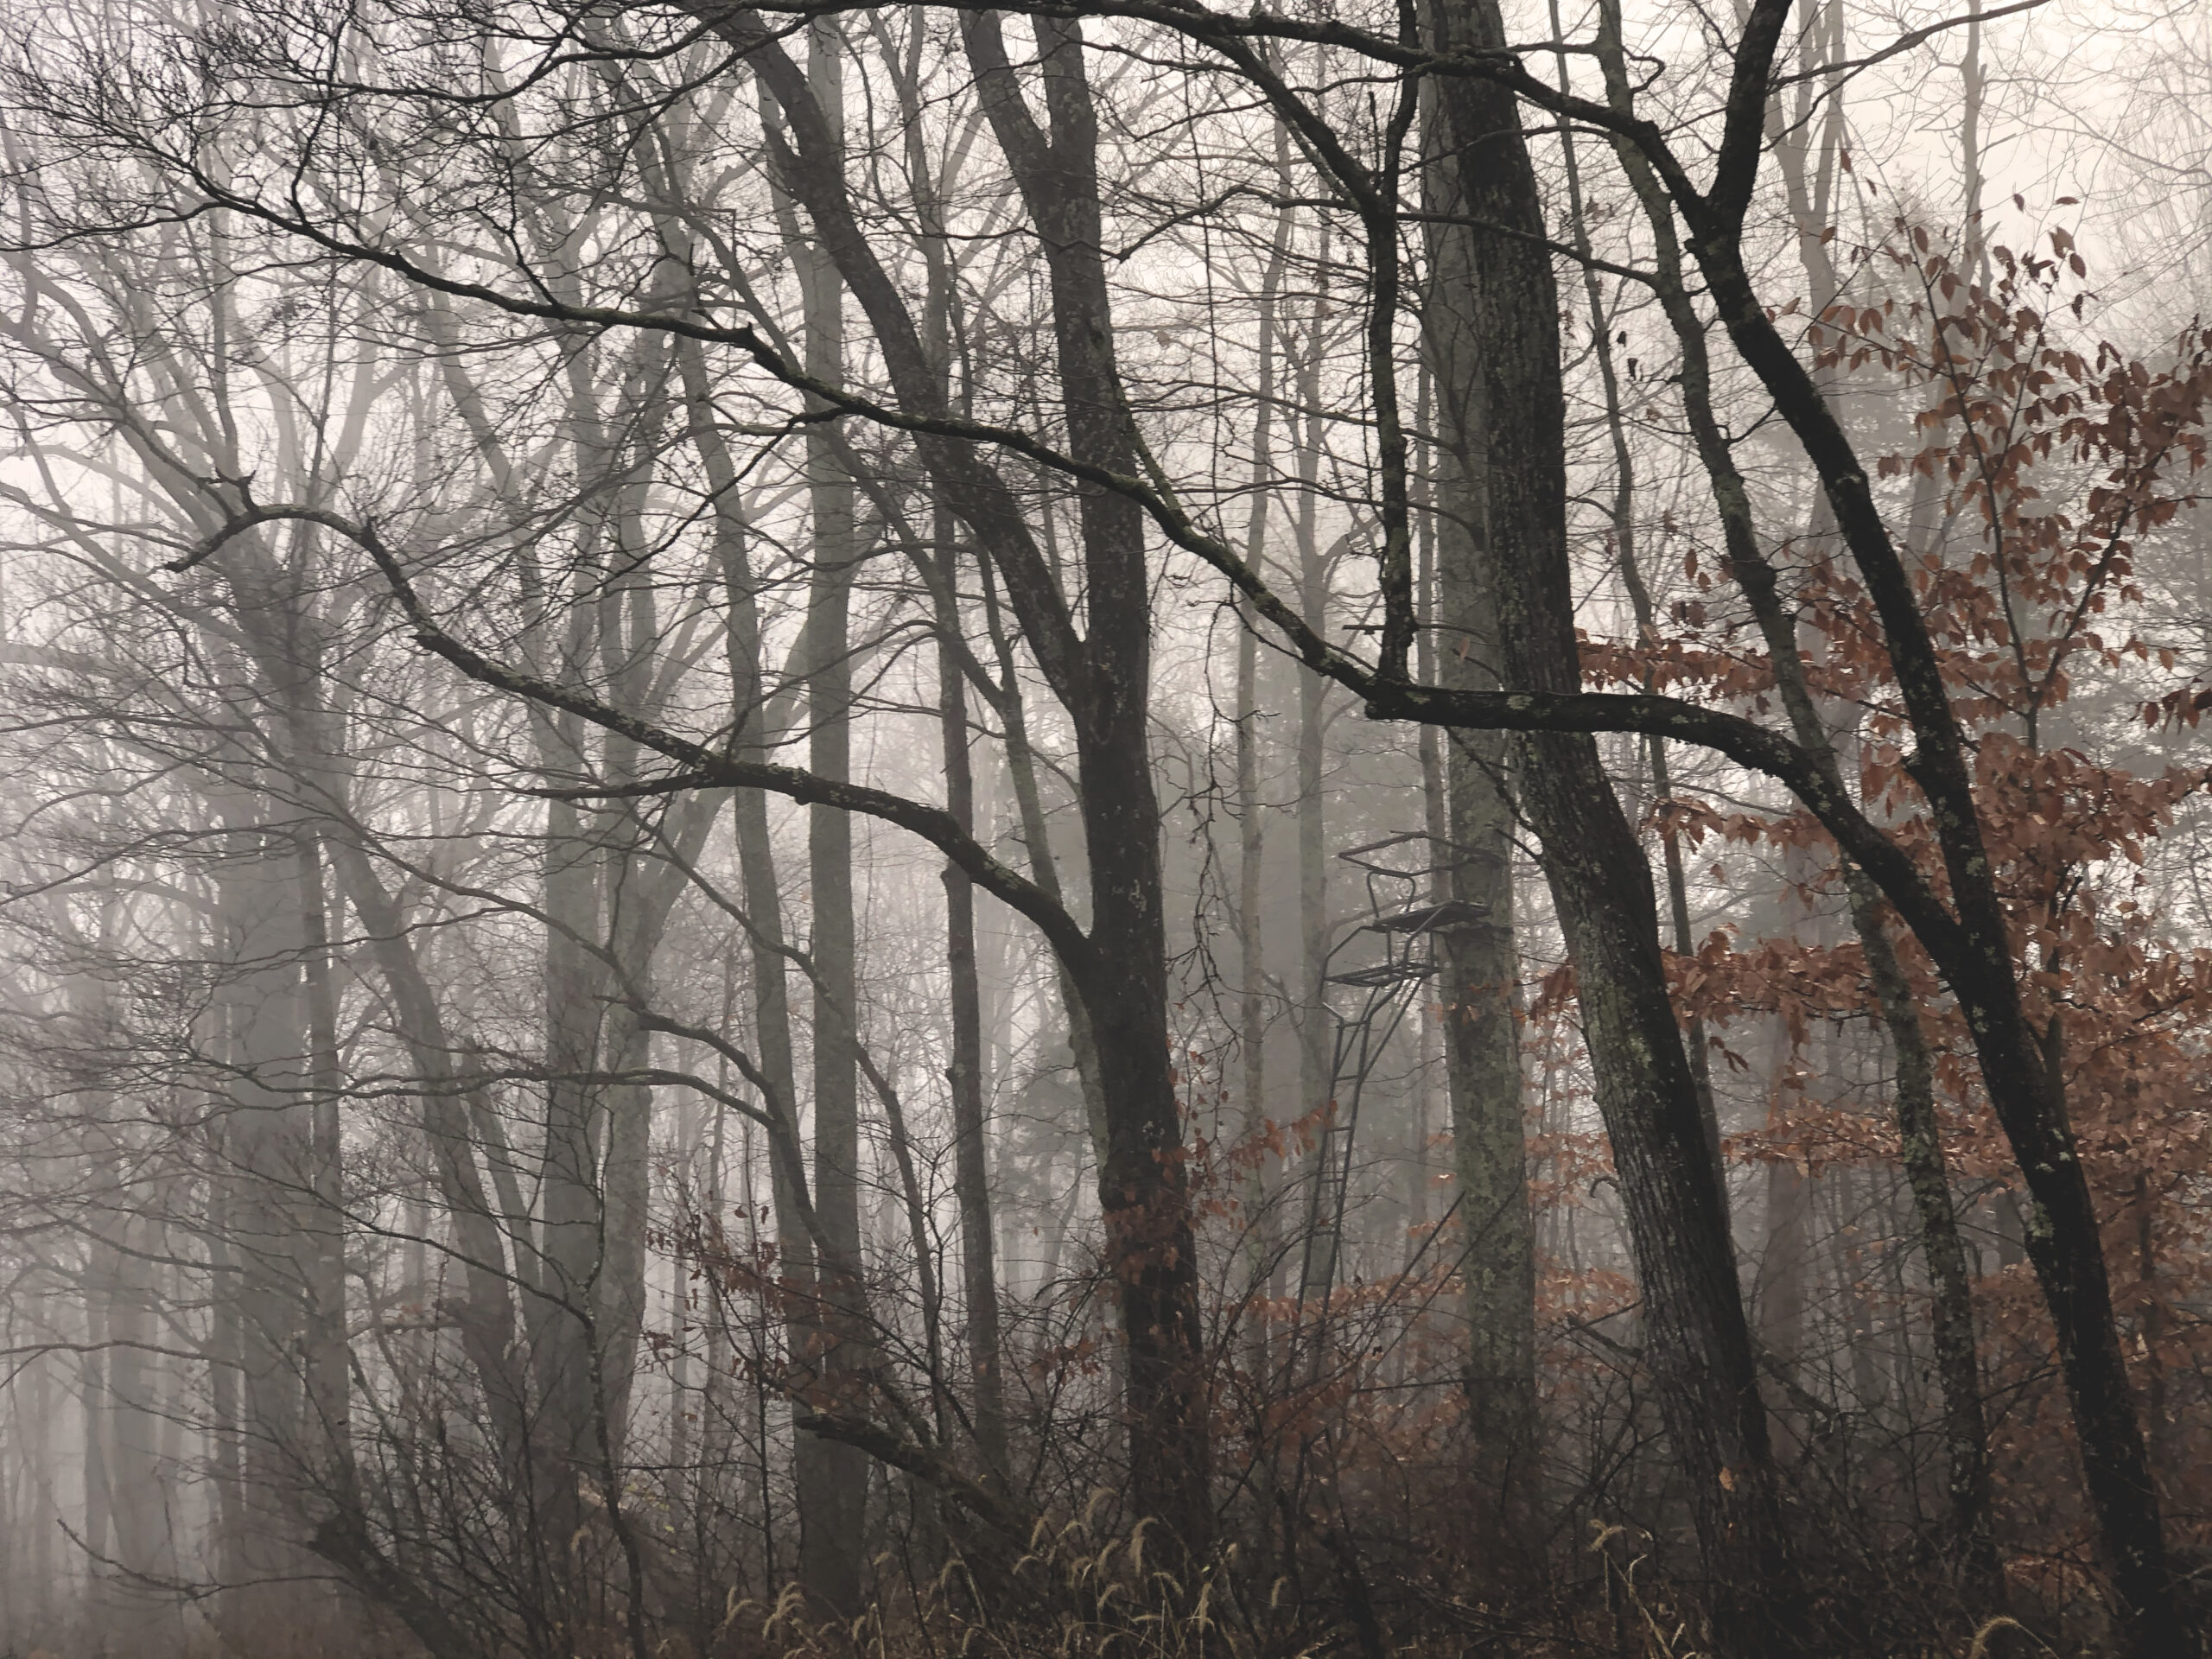 A double-seater ladder treestand tucked into a misty wooded field edge.